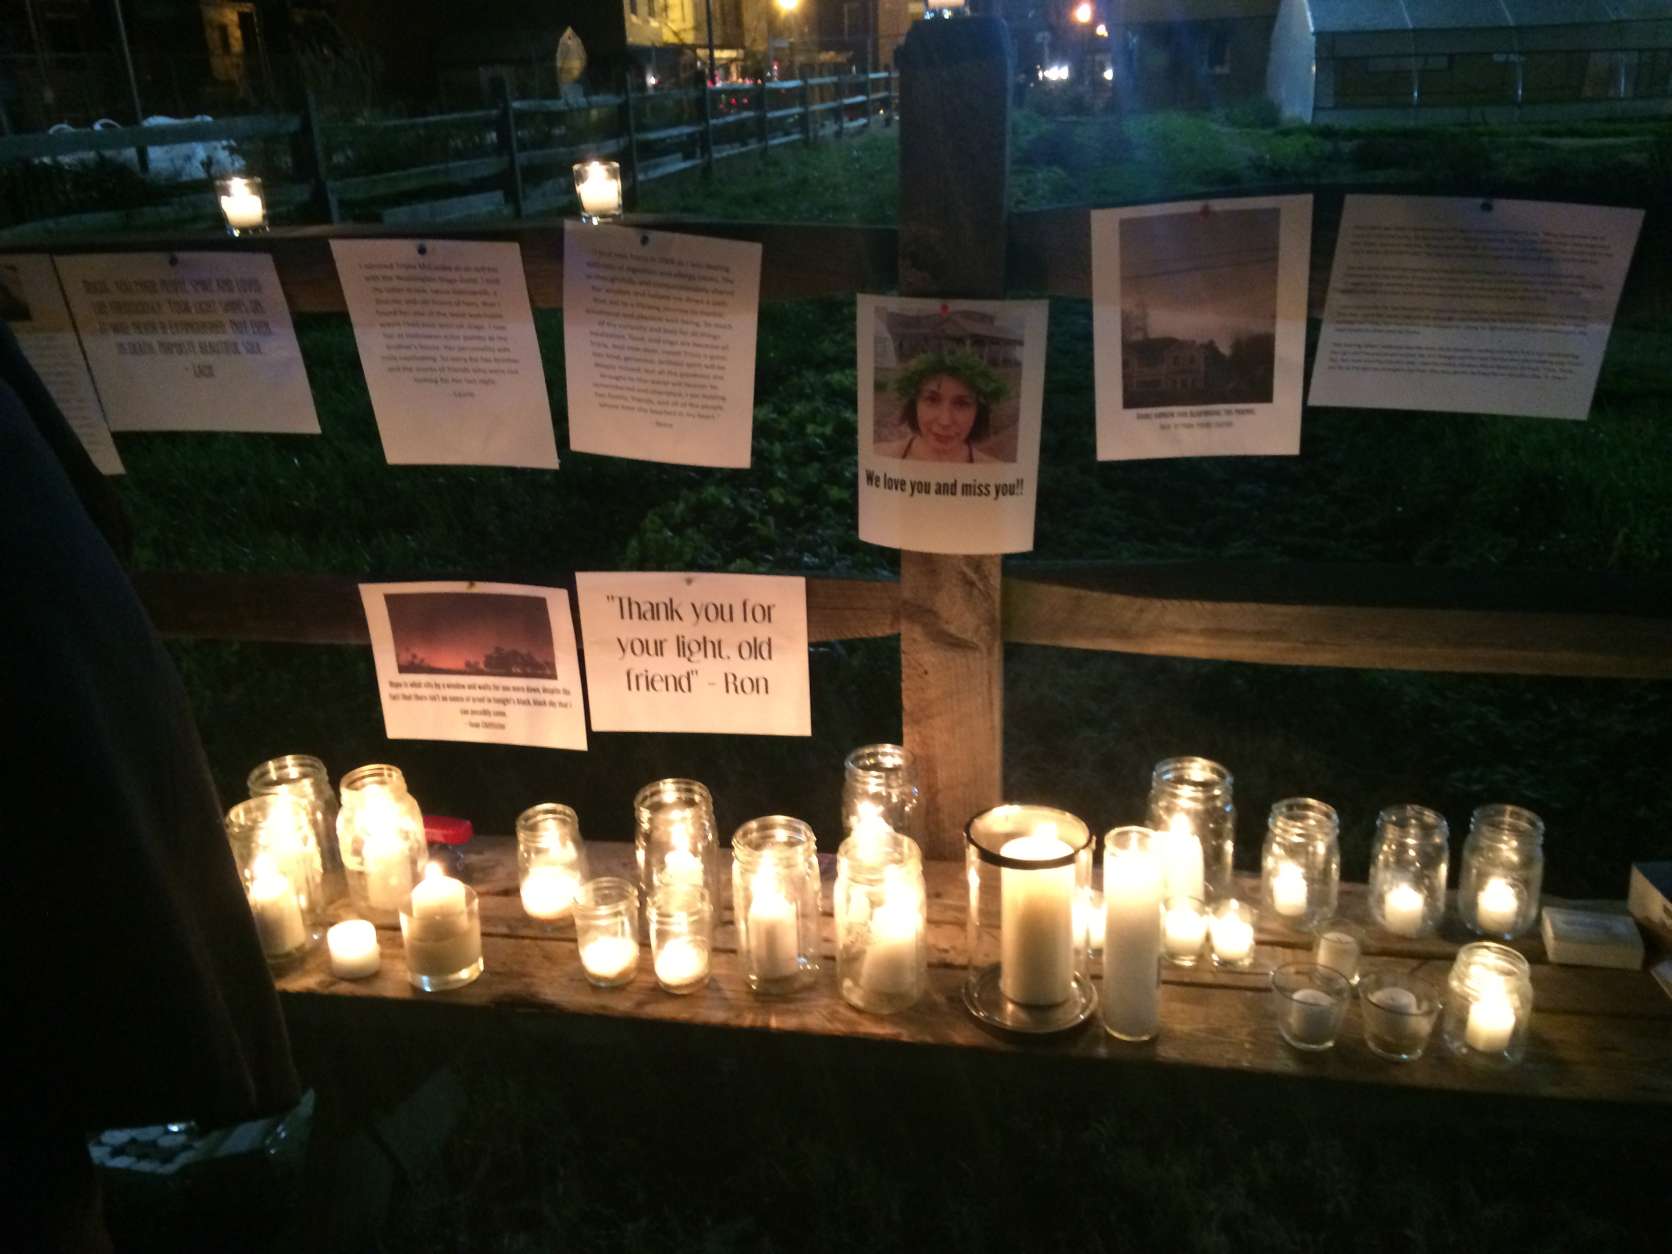 Supporters and mourners create a candlelit memorial for Tricia McCauley. (WTOP/Dick Uliano)